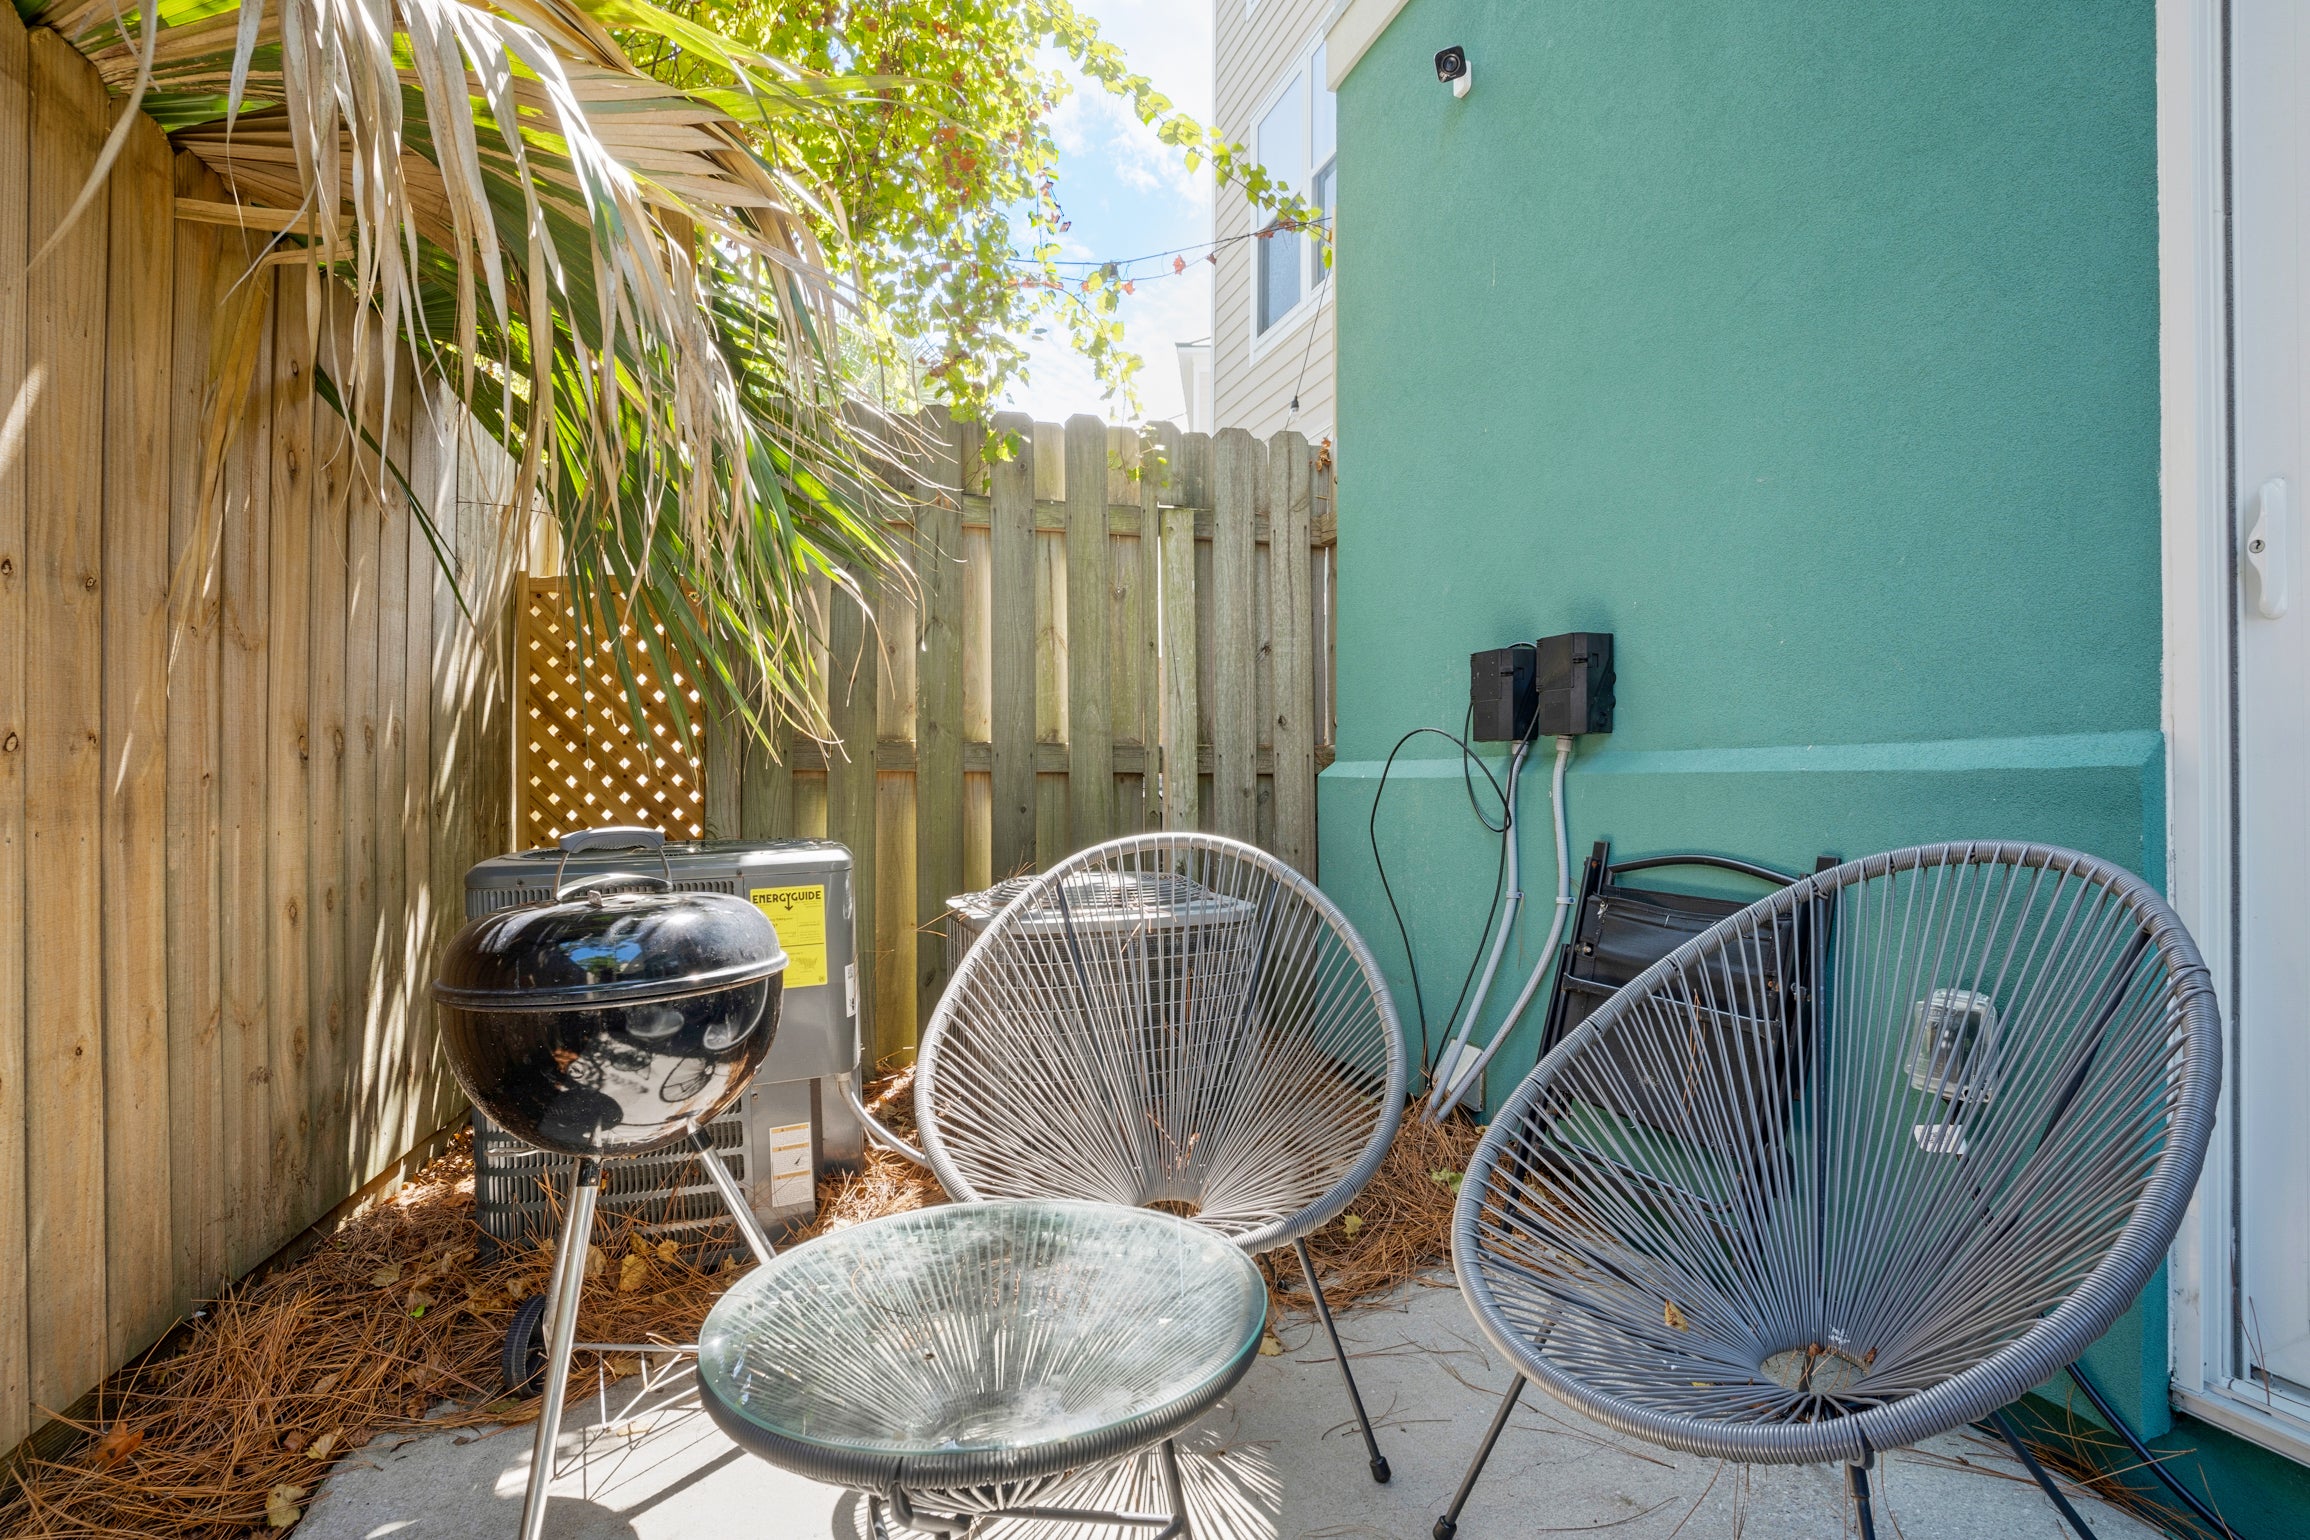 Back patio with grill